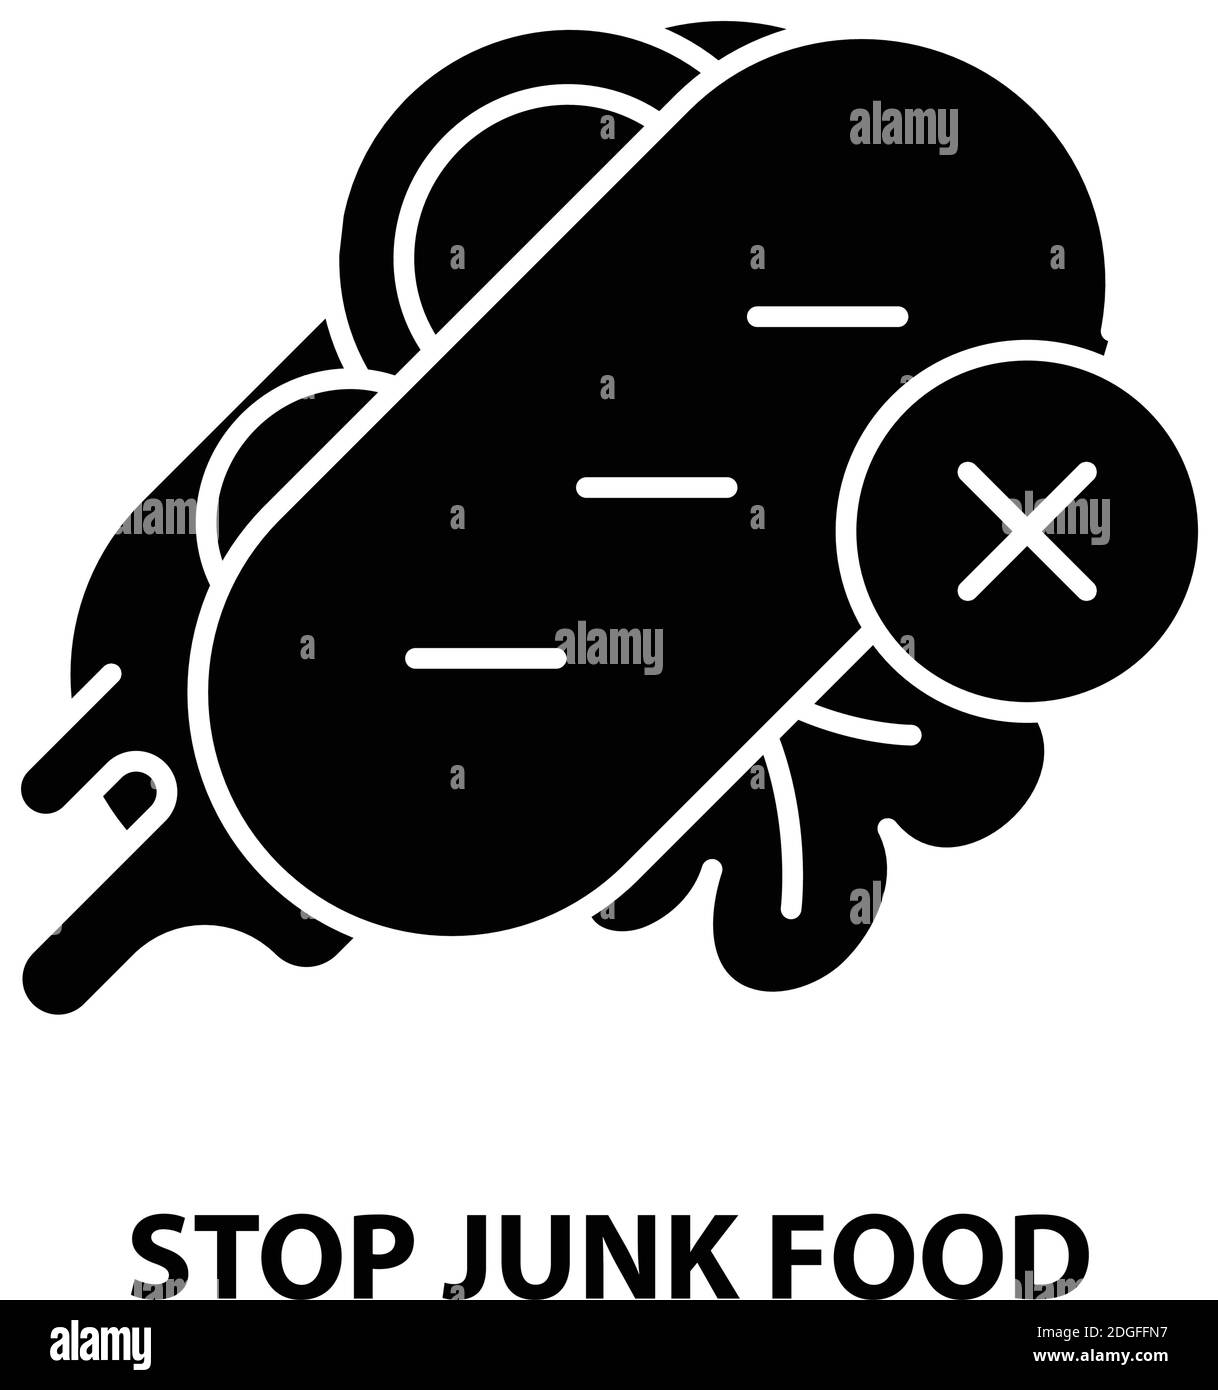 stop junk food icon, black vector sign with editable strokes, concept illustration Stock Vector